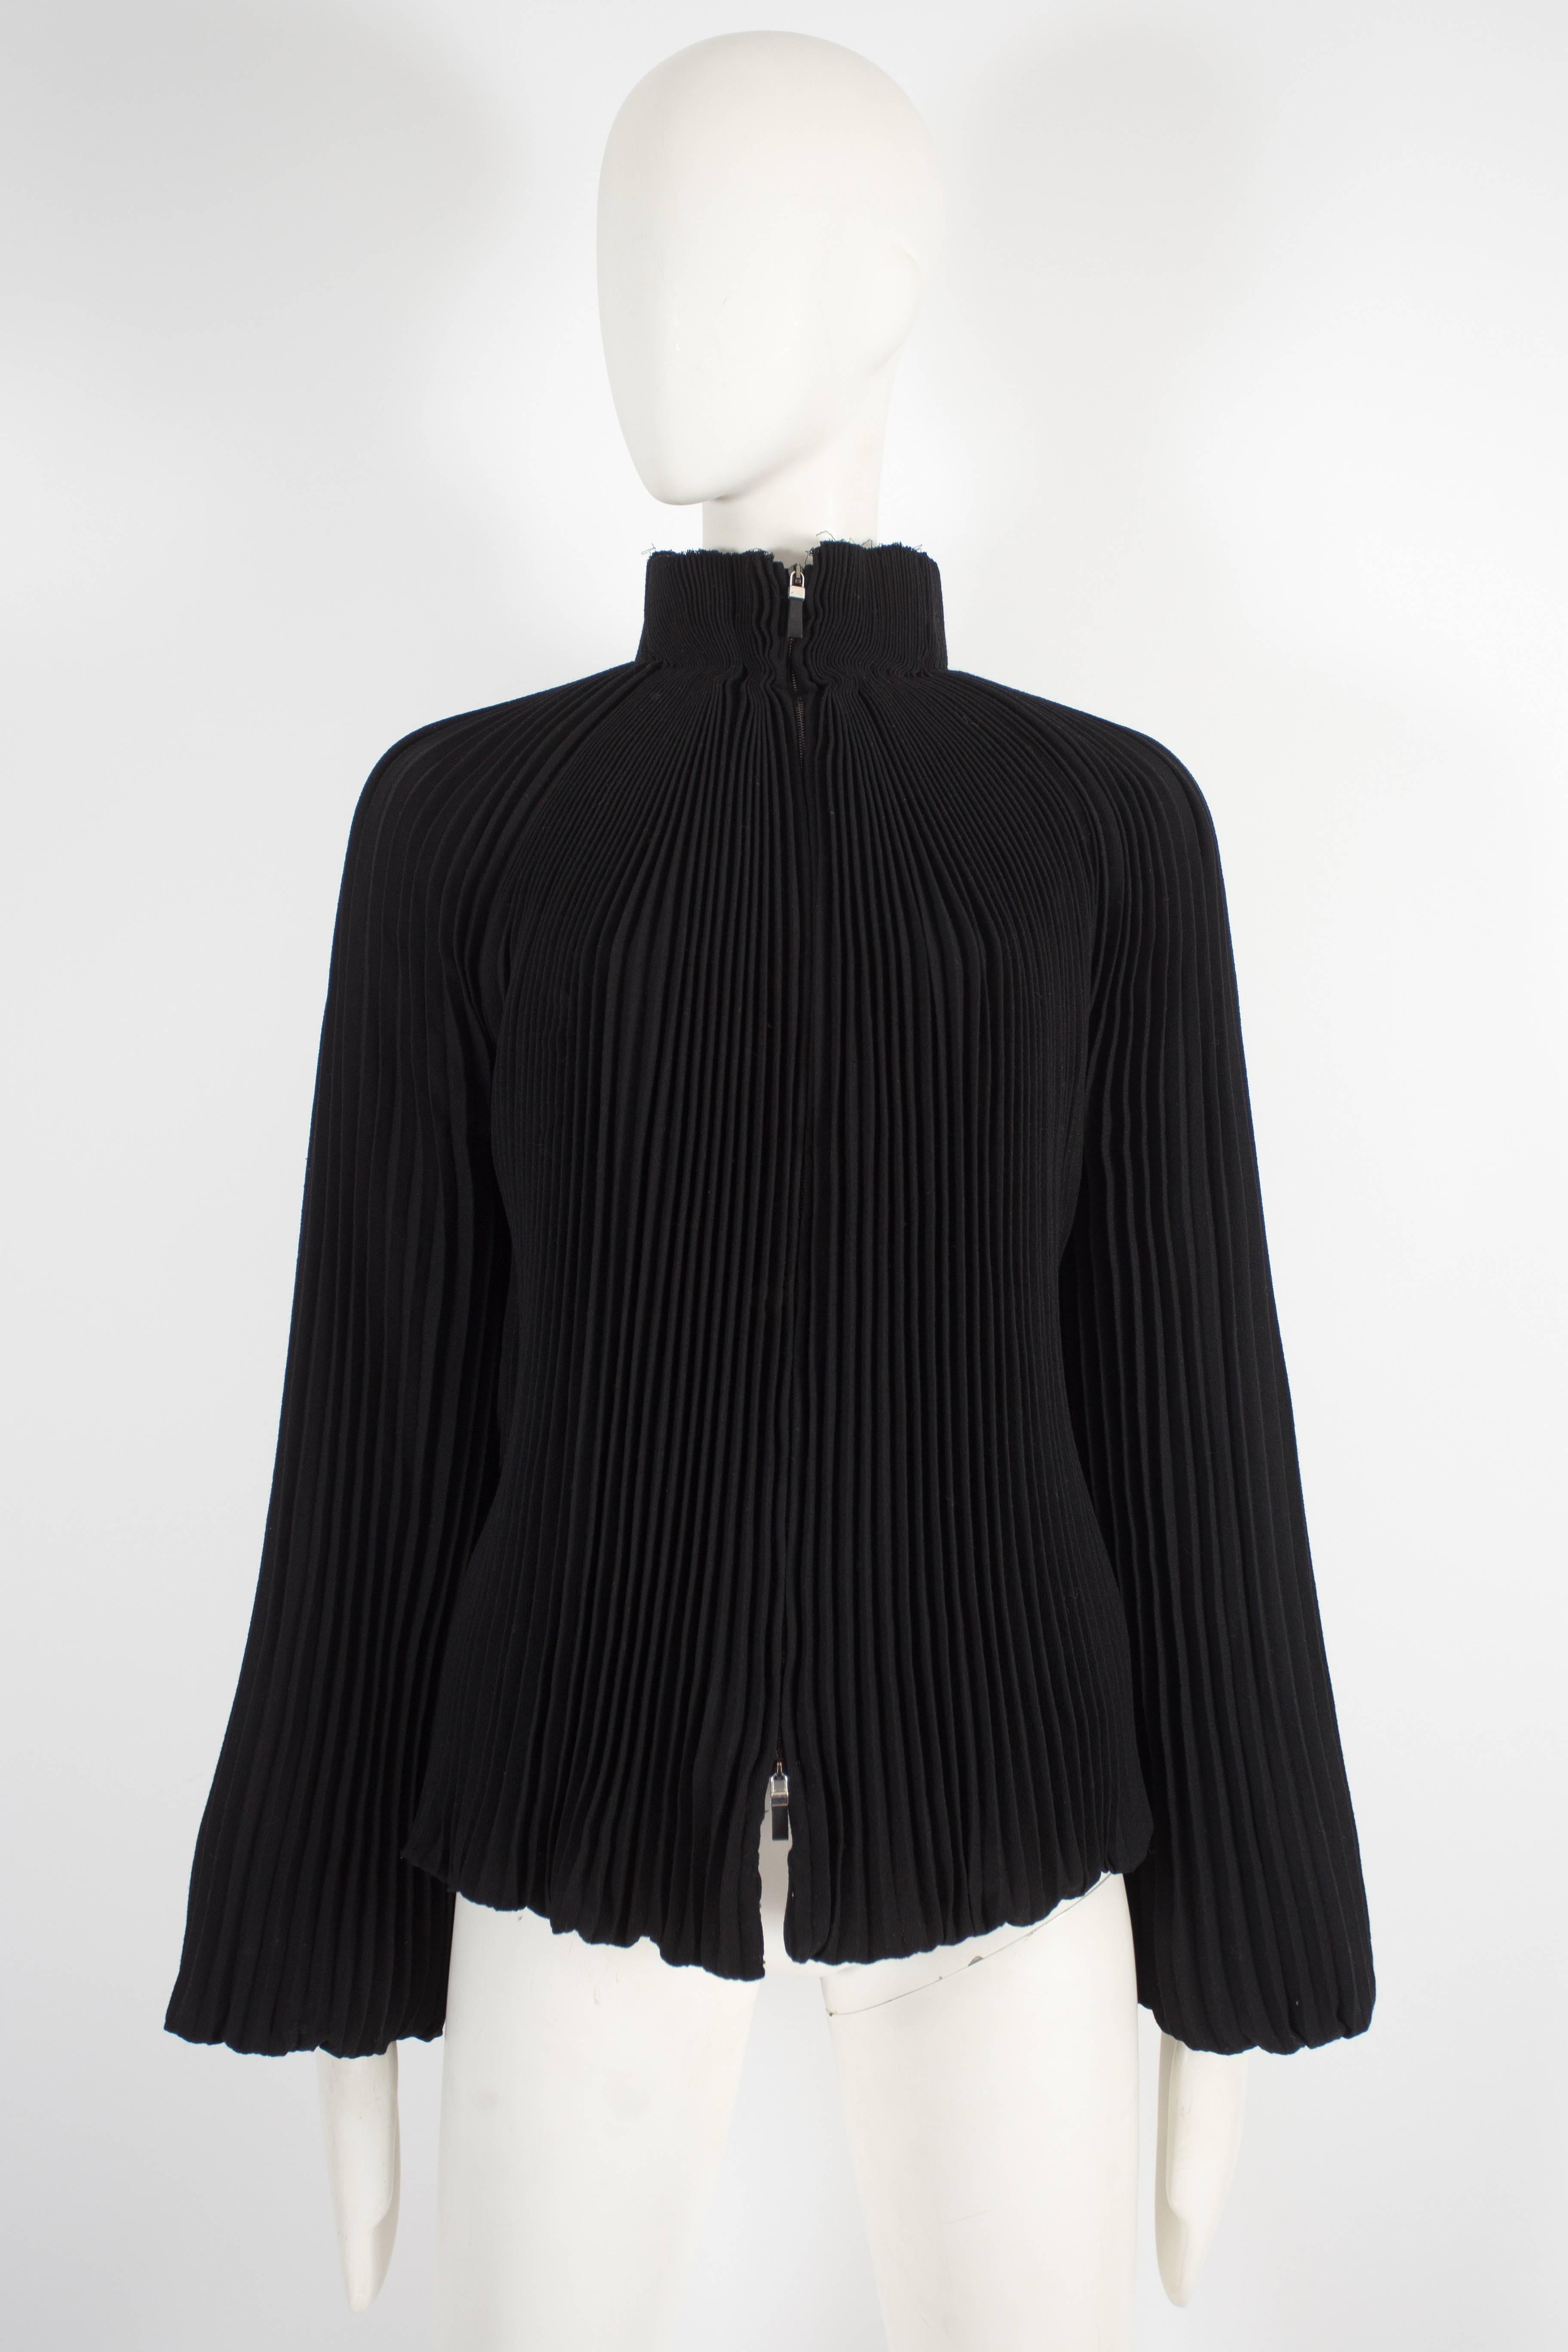 Introducing an exquisite Alexander McQueen evening jacket from the pre-fall 2004 collection. This jacket is a true masterpiece, showcasing the brand's signature craftsmanship and design.

Constructed in accordion pleated black wool crepe throughout,